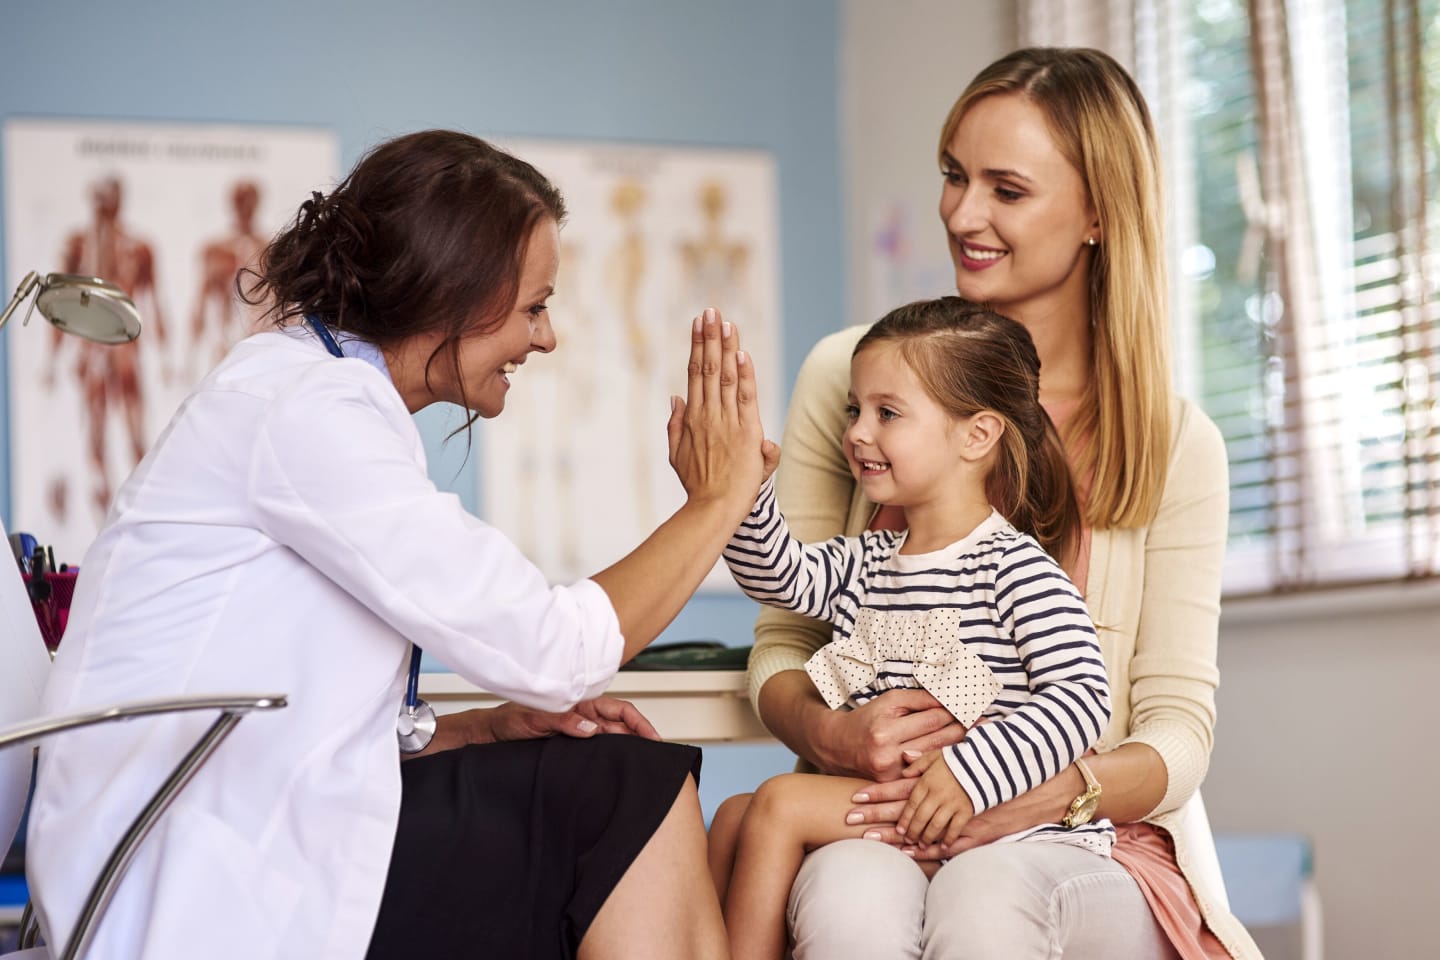 Female physician giving young girl a high-5 during a doctor's appointment